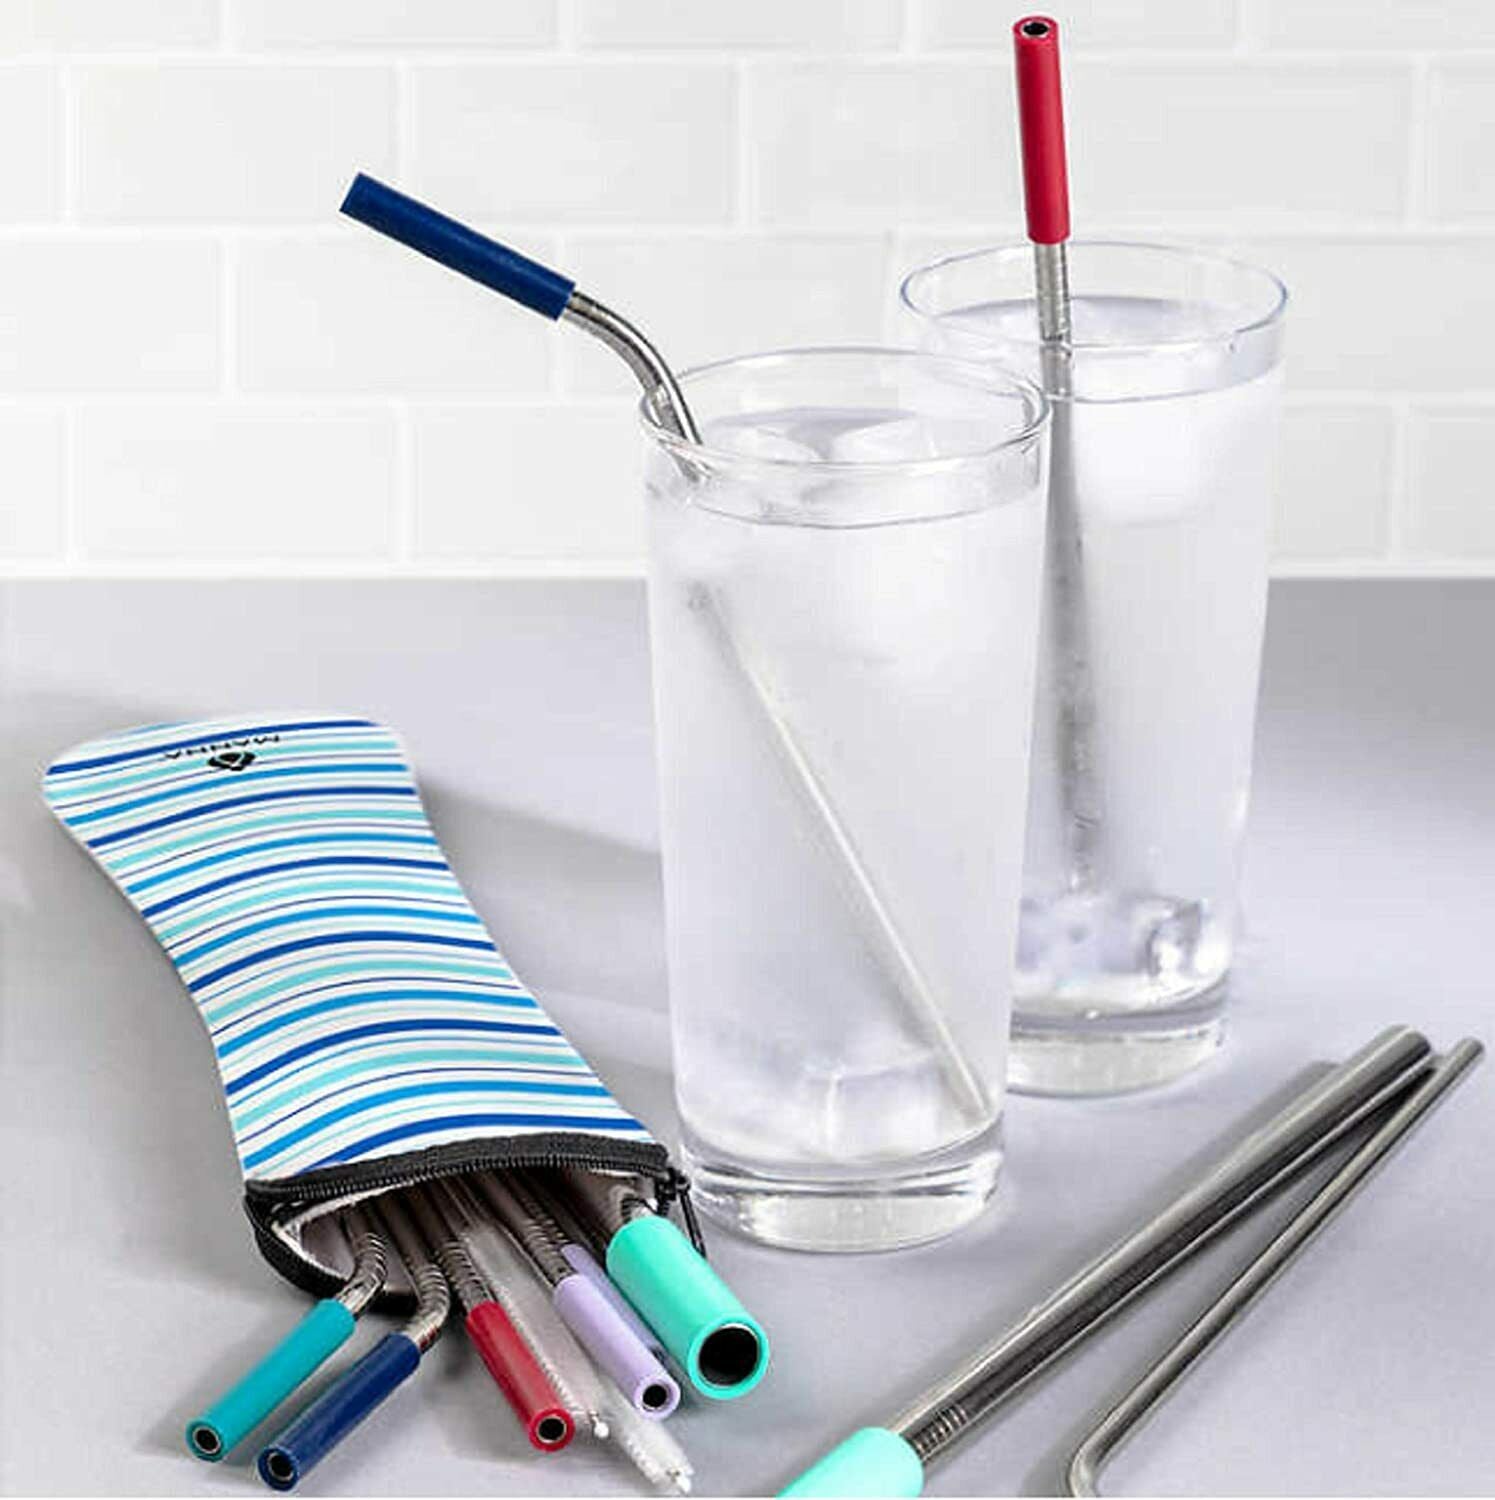 MANNA Stainless Steel Reusable Straws for The Whole Family - Easy Shopping Center